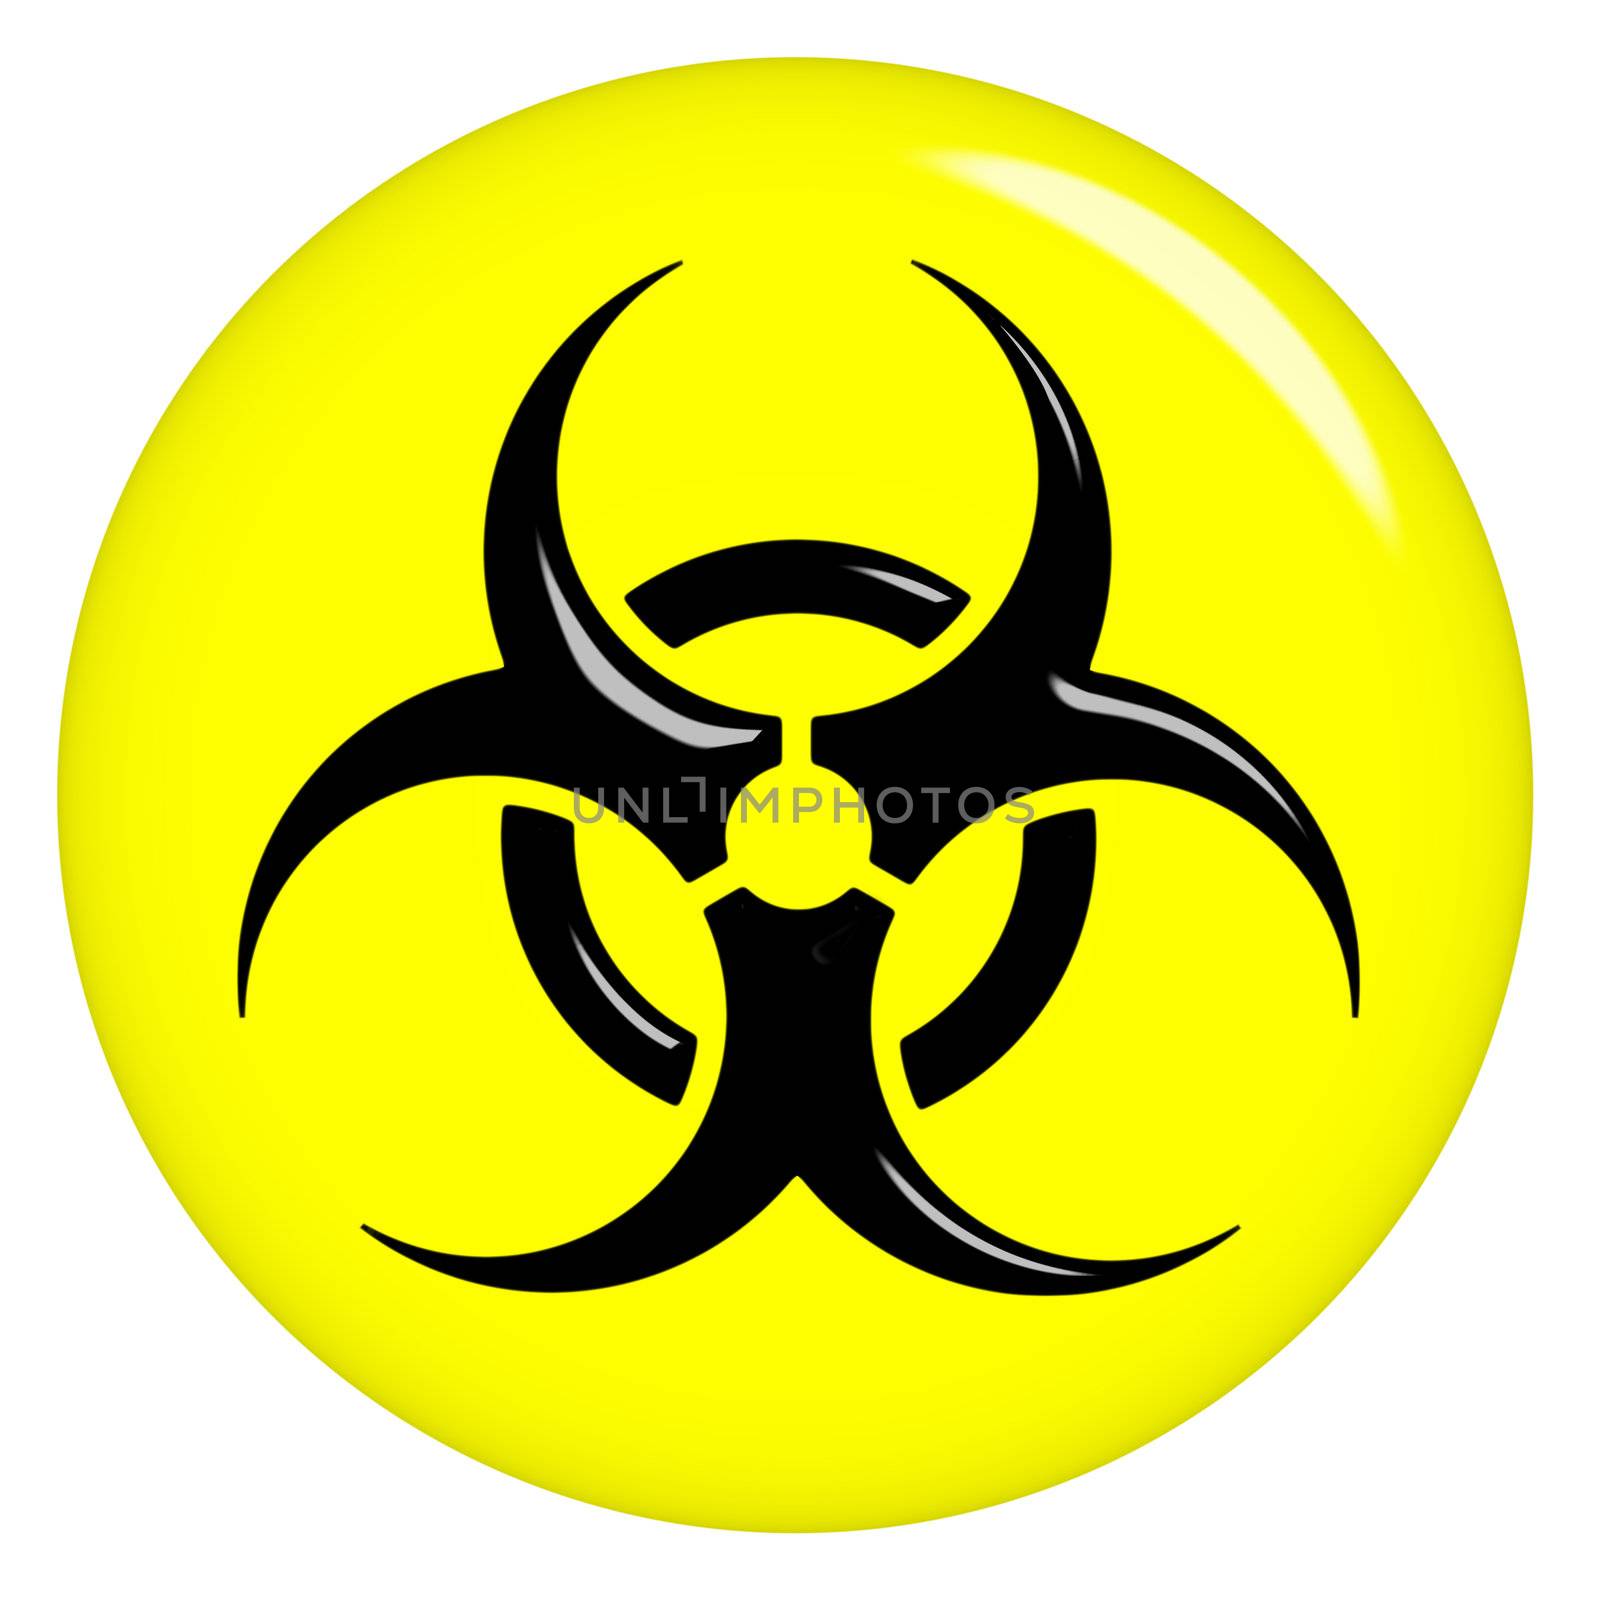 3d biohazard sign isolated in white